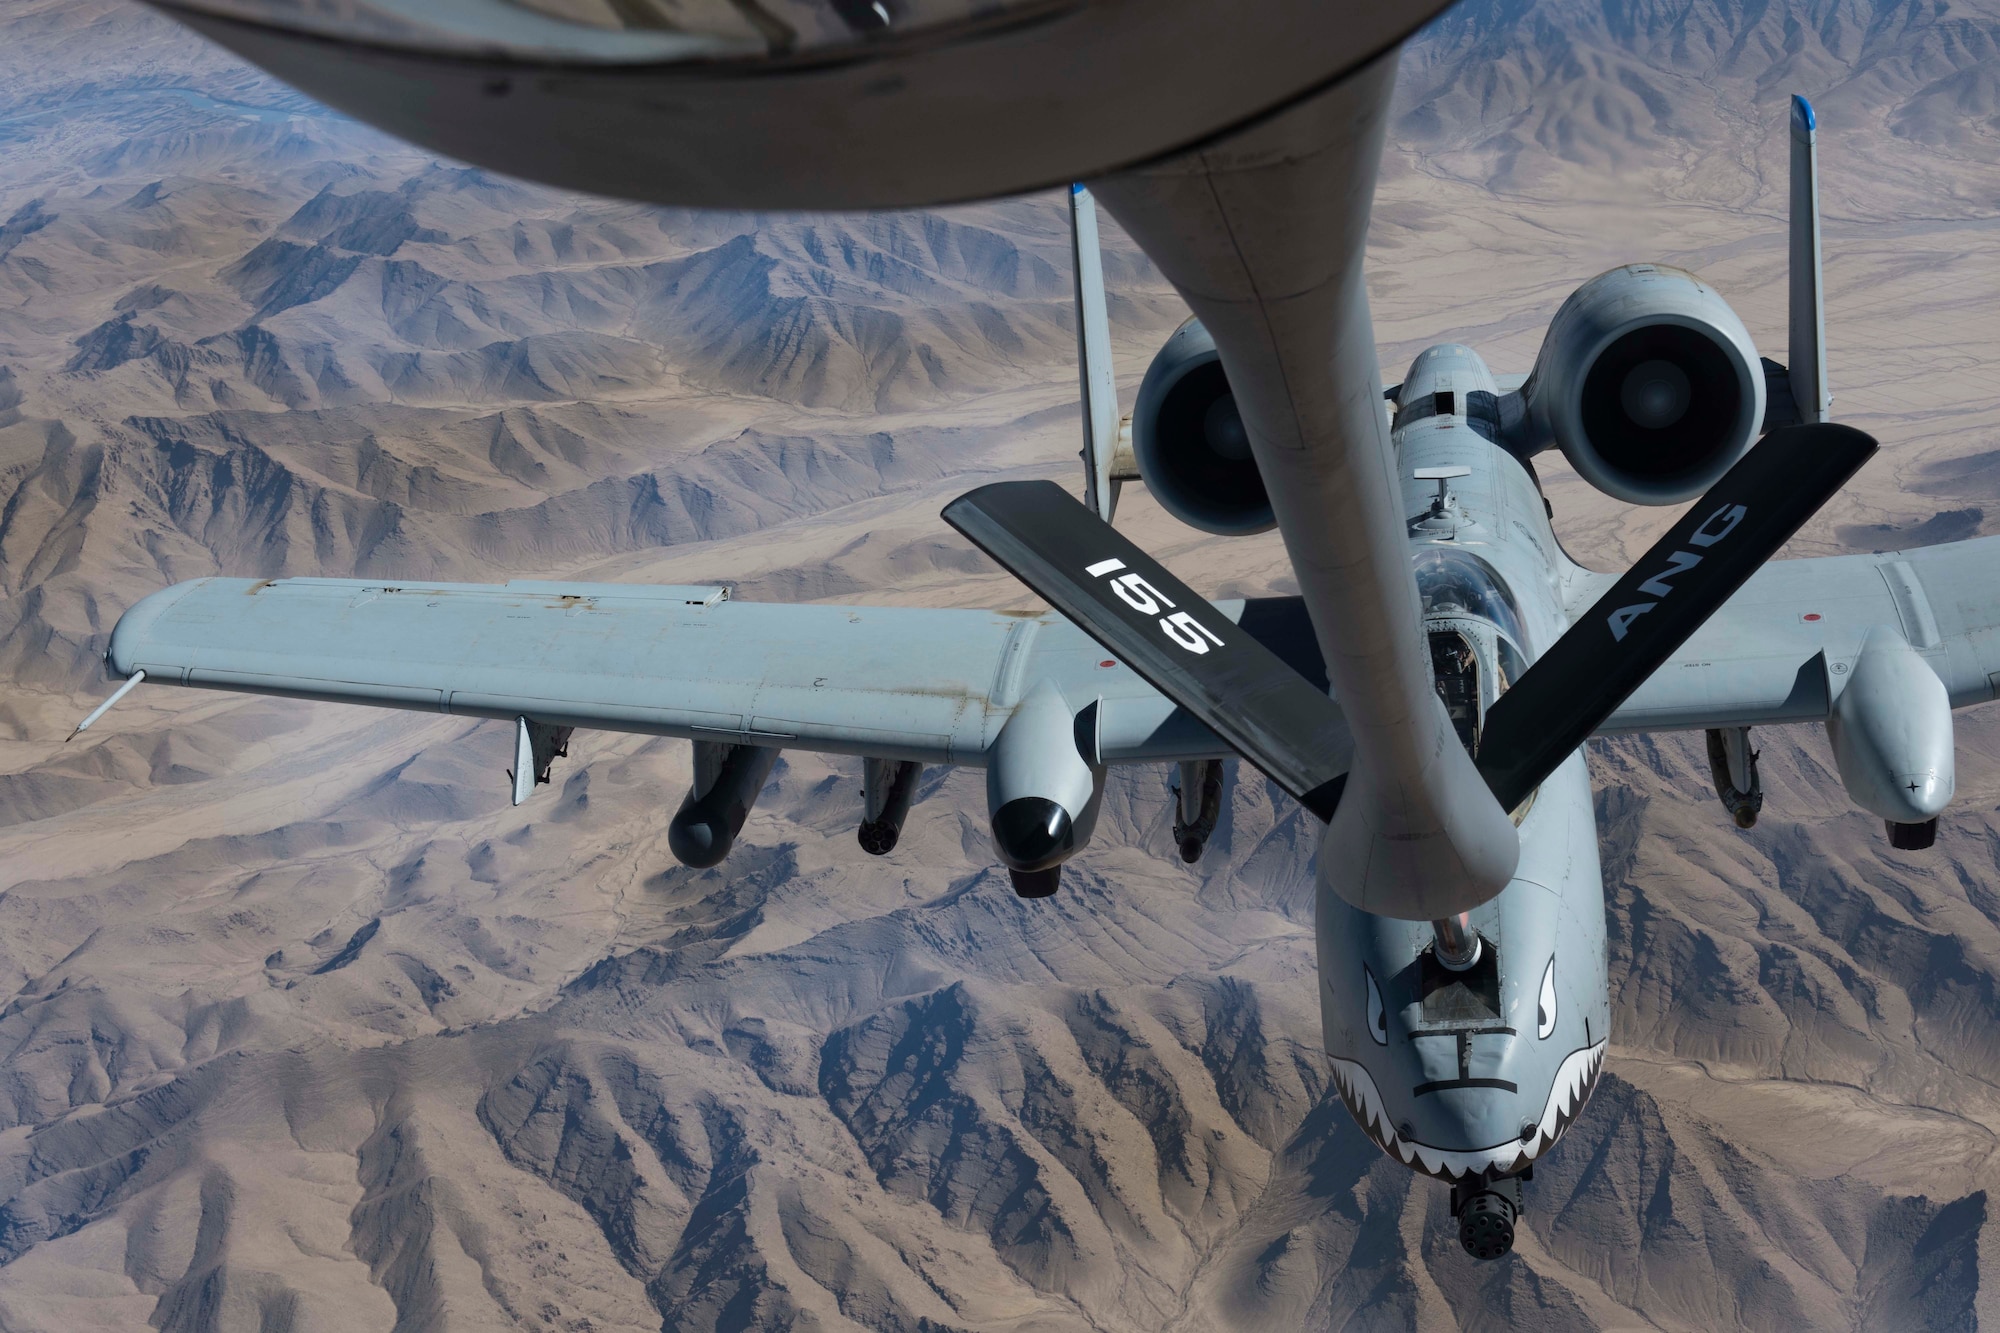 An A-10 Thunderbolt II, assigned to the 75th Expeditionary Fighter Squadron, receives fuel from a KC-135 Stratotanker, assigned to the 340th Expeditionary Air Refueling Squadron, while flying over Kandahar Province, Afghanistan, Nov. 18, 2018.